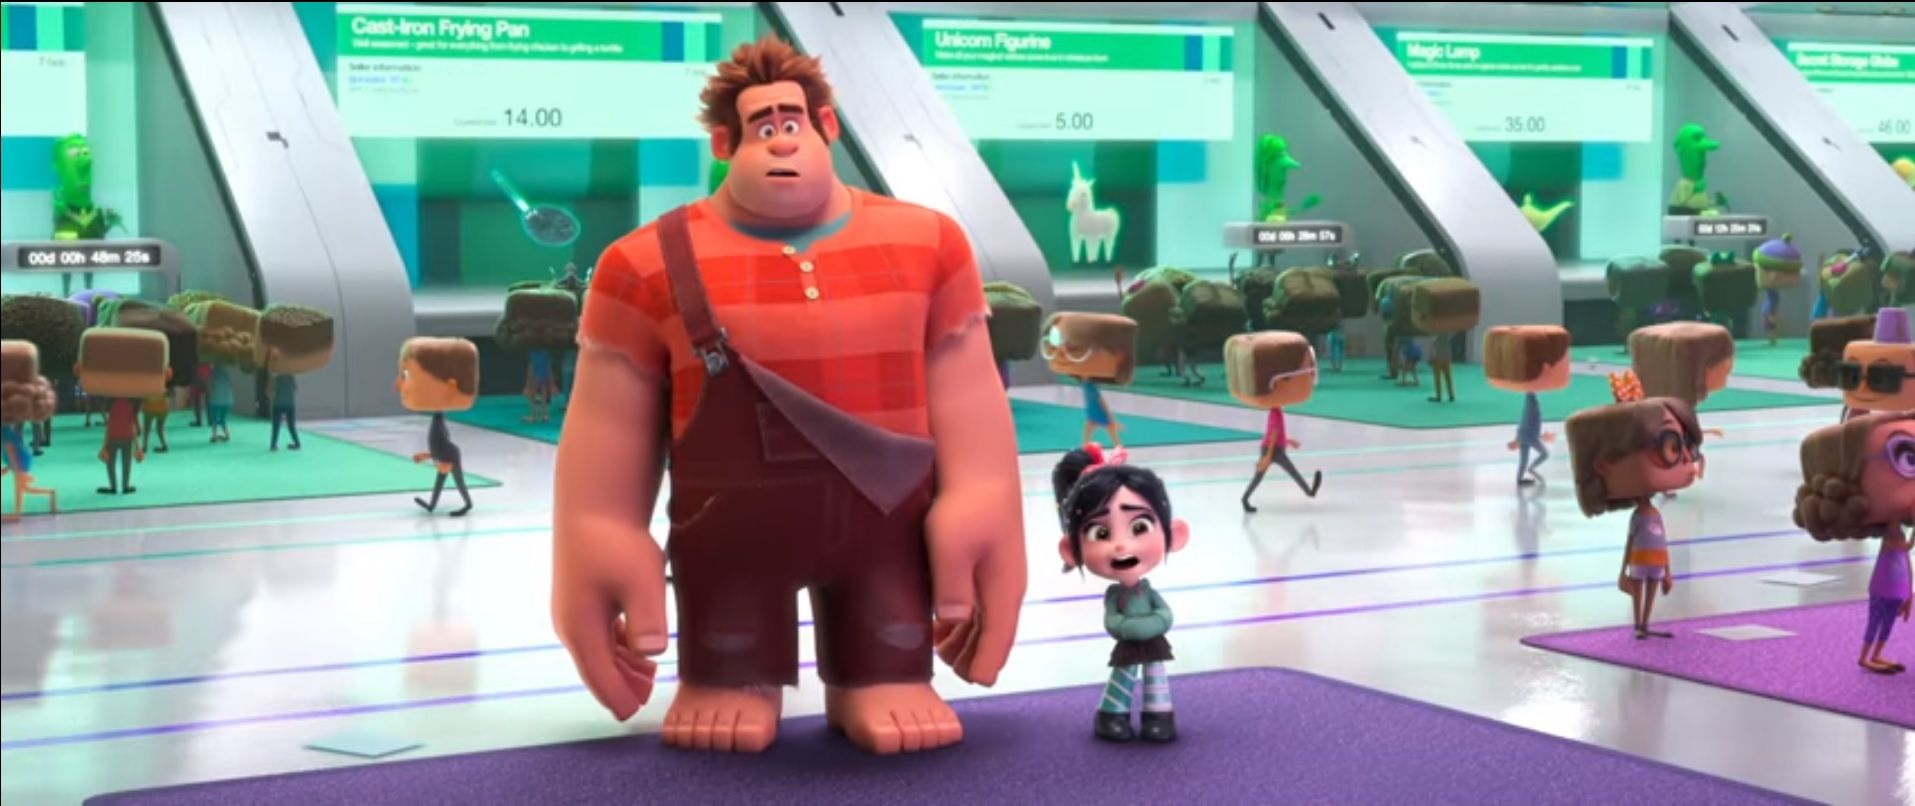 Resensie: Ralph Breaks the Internet Is a Meme come to life with a Surprising Message